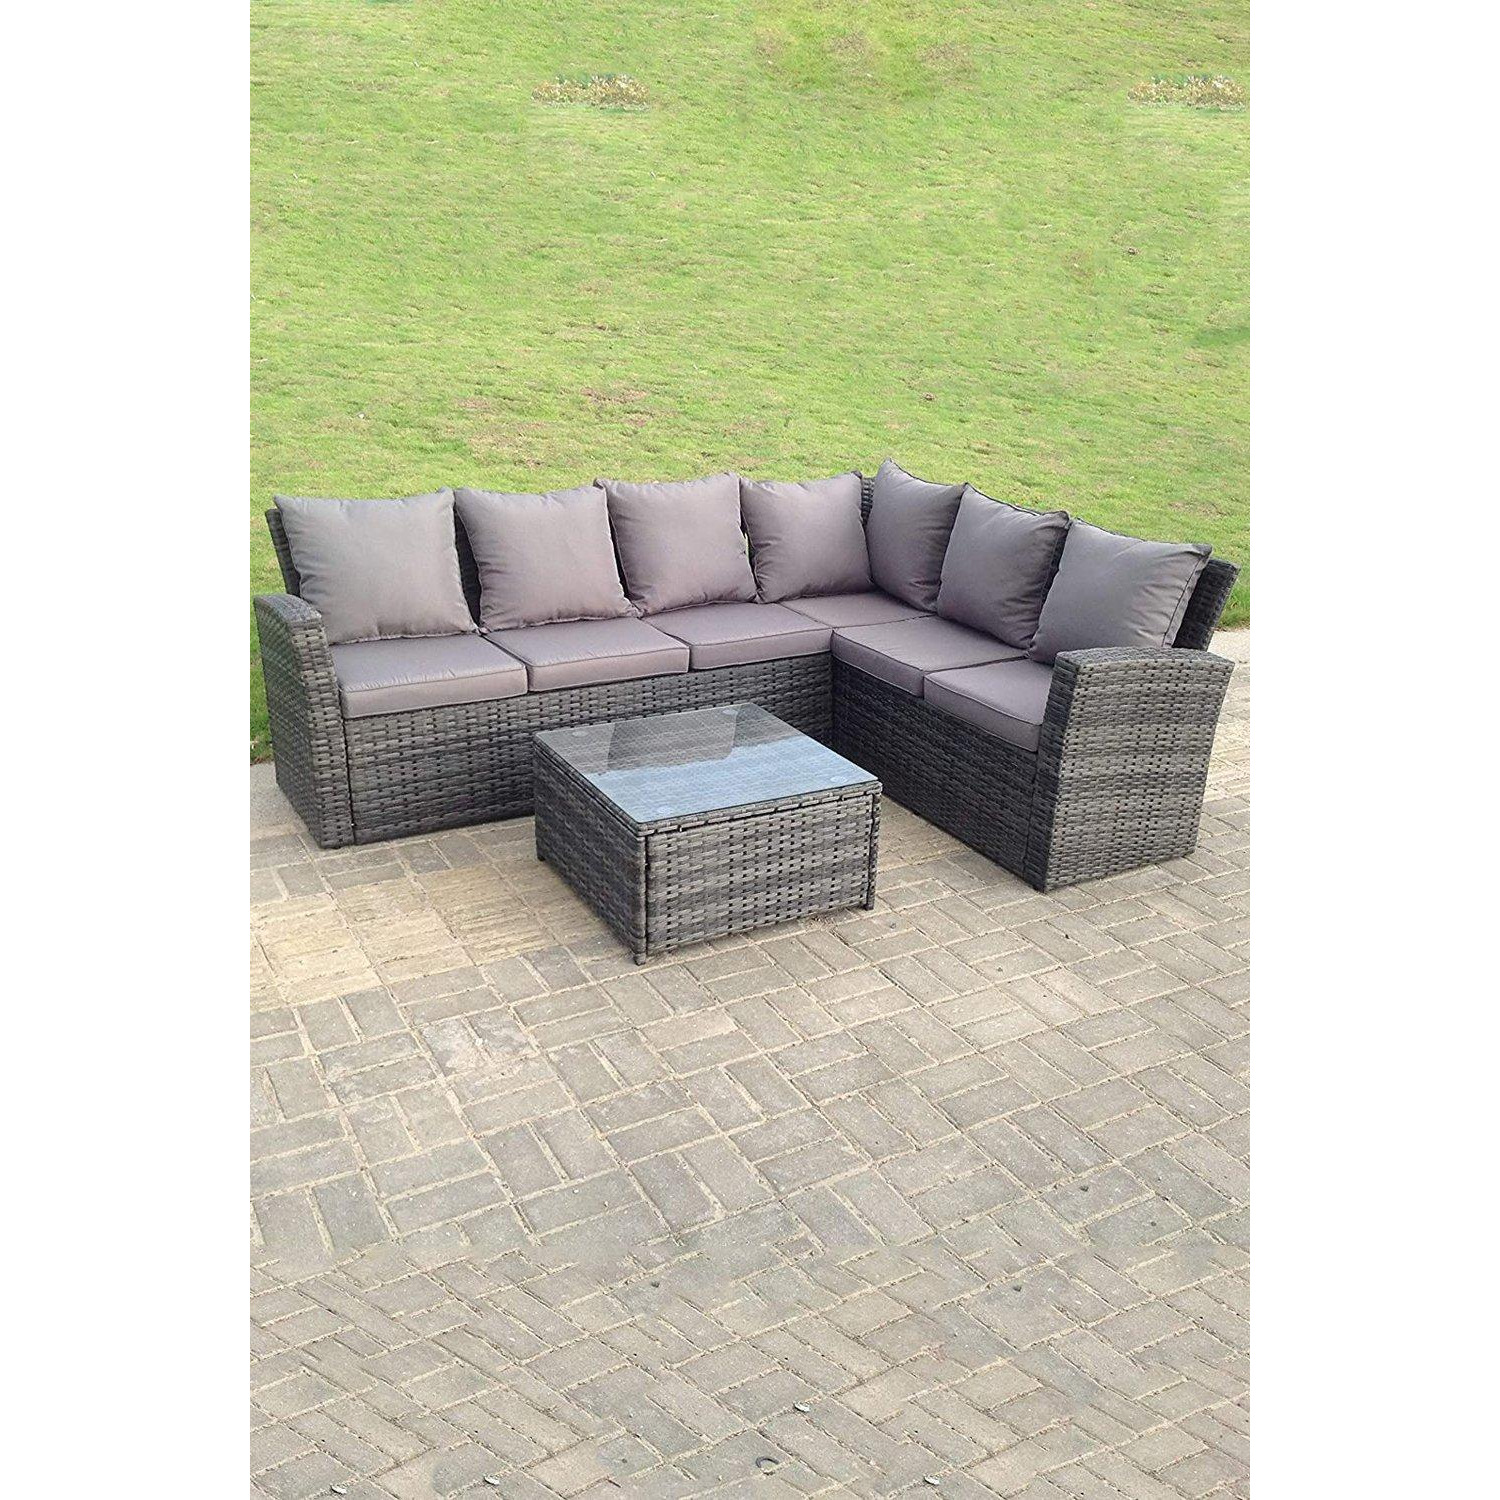 High back mixed outdoor corner rattan sofa set square coffee table - image 1